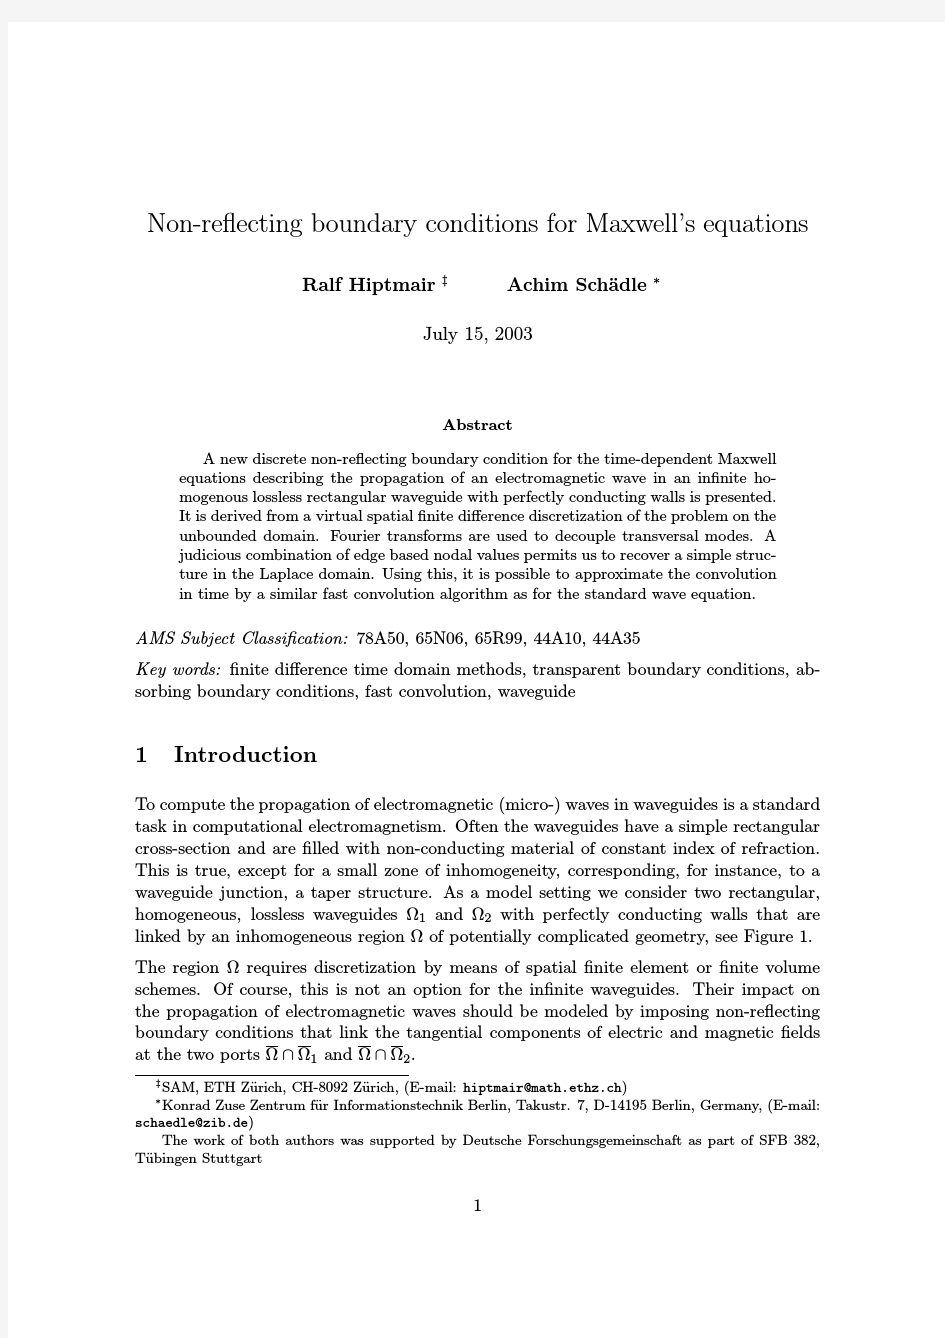 Non-reflecting boundary conditions for Maxwell’s equations